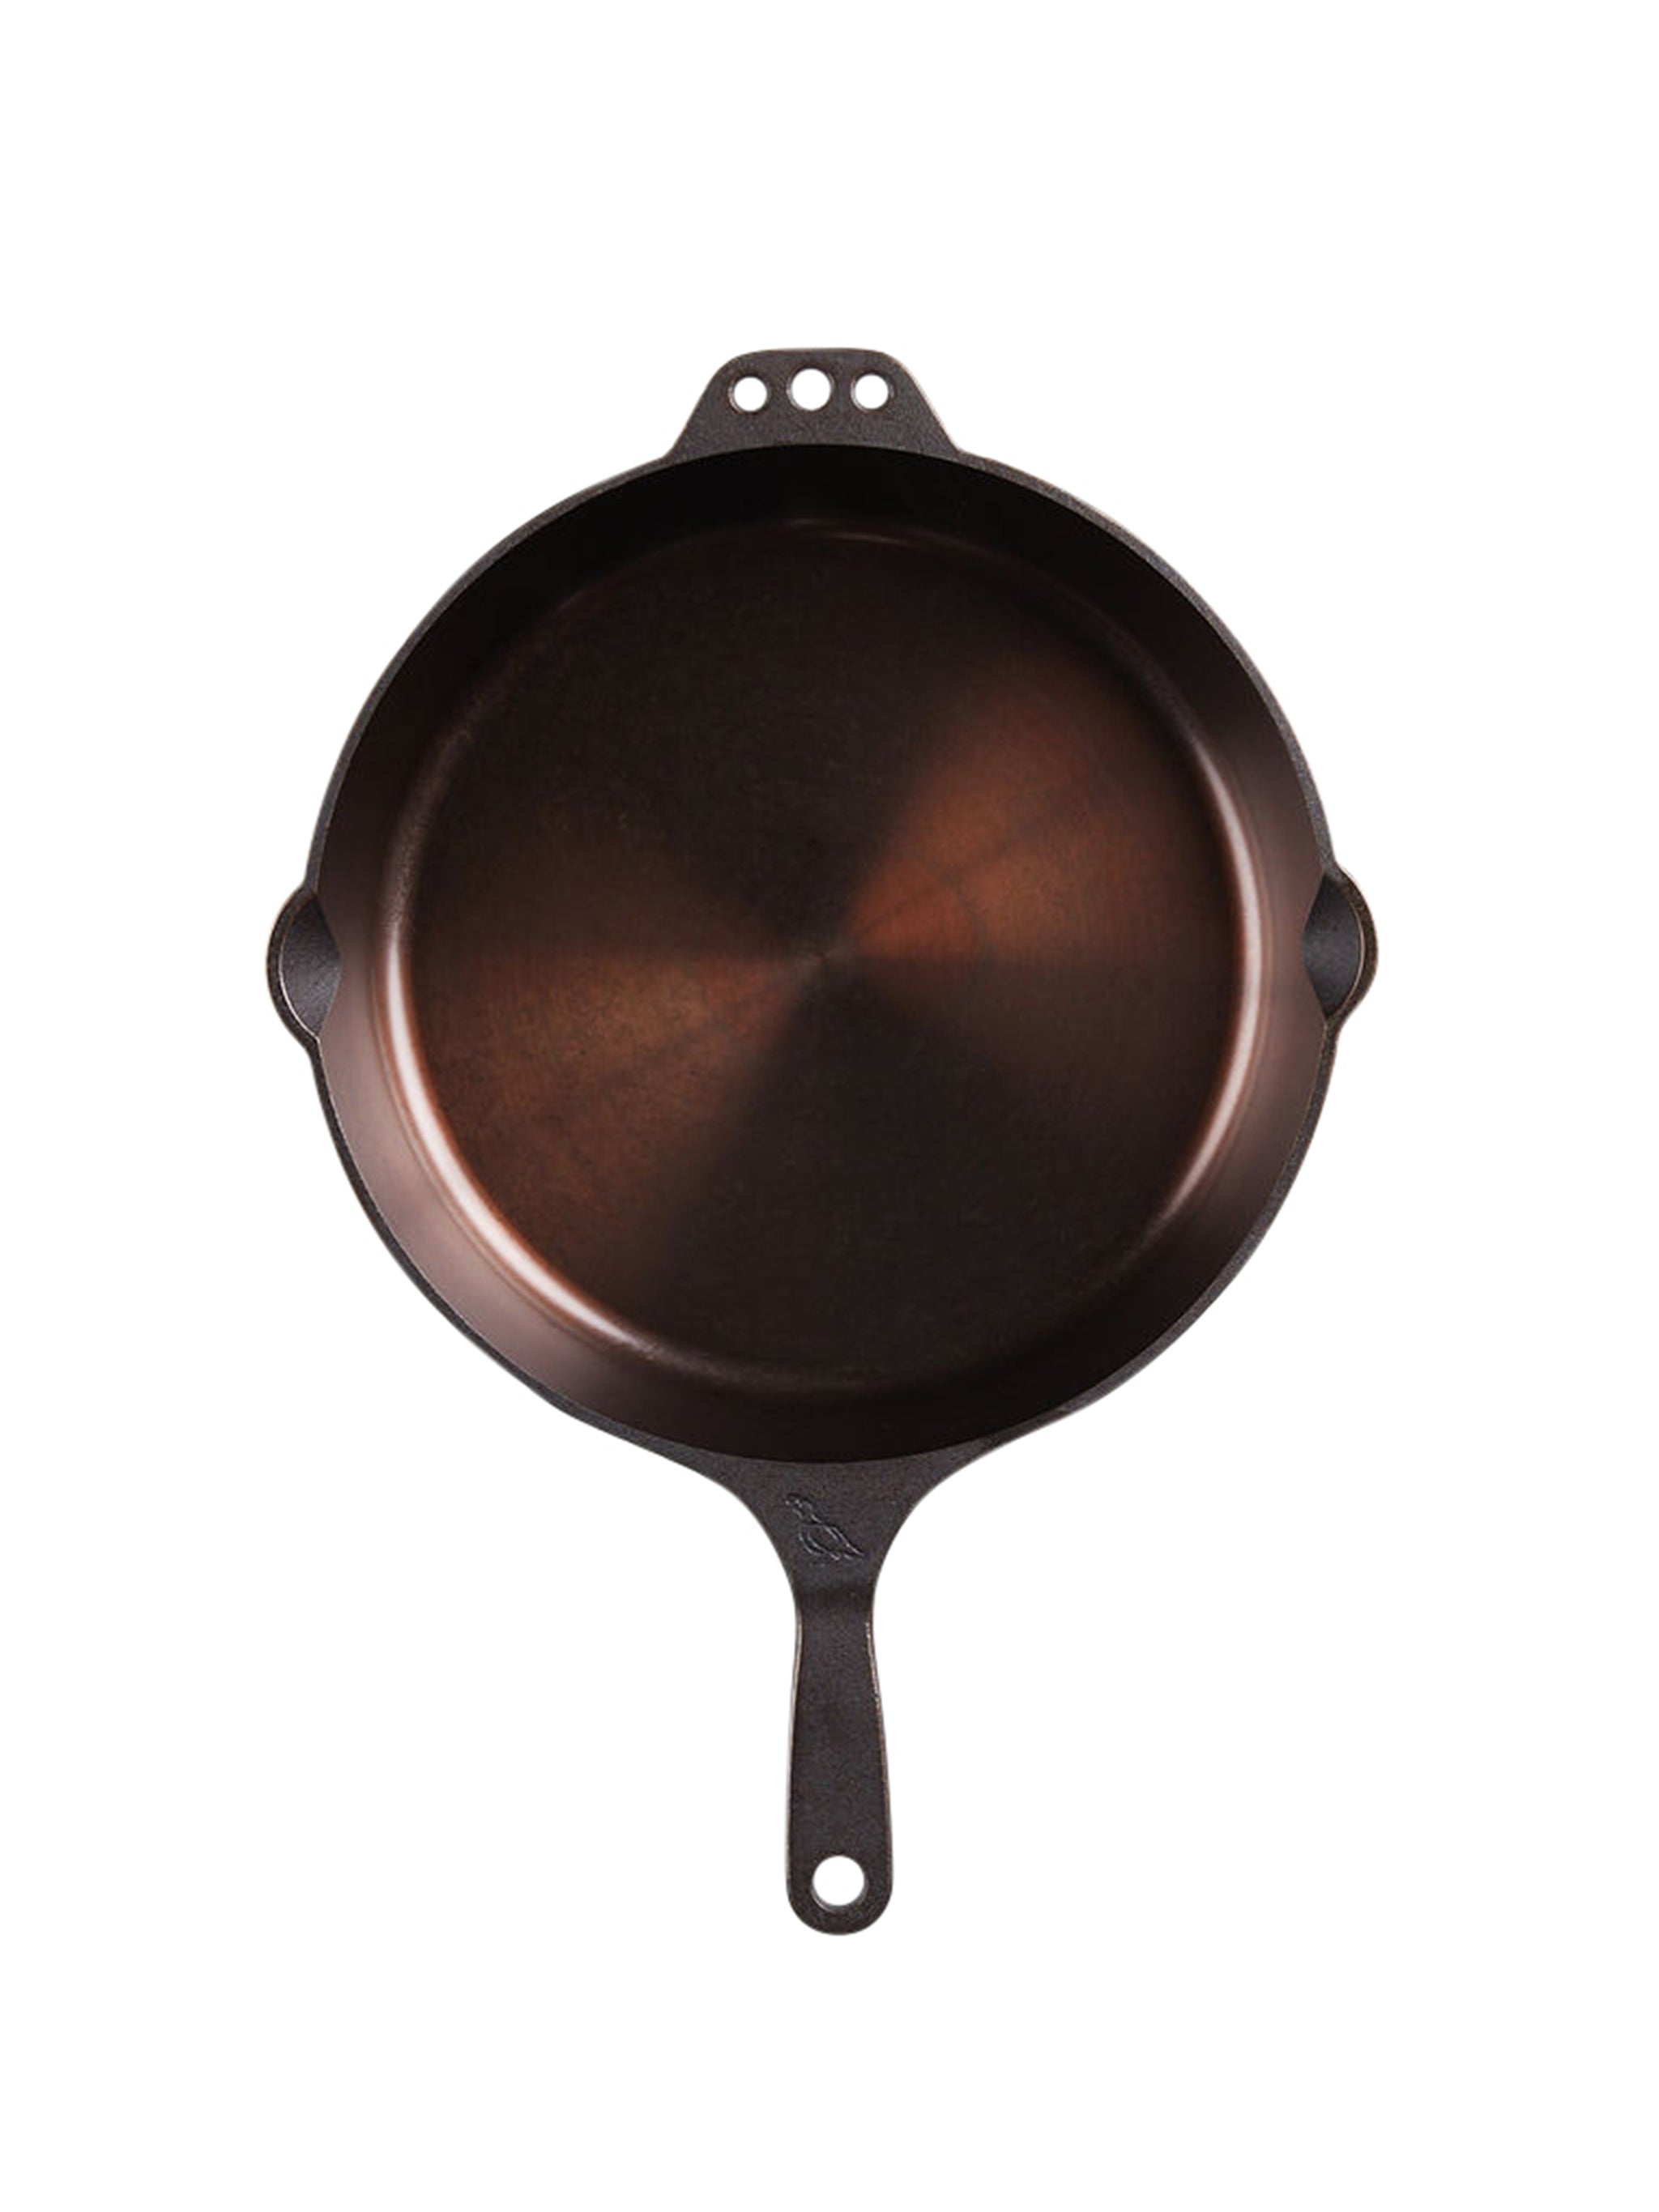 Shop the Smithey No. 10 Cast Iron Skillet at Weston Table